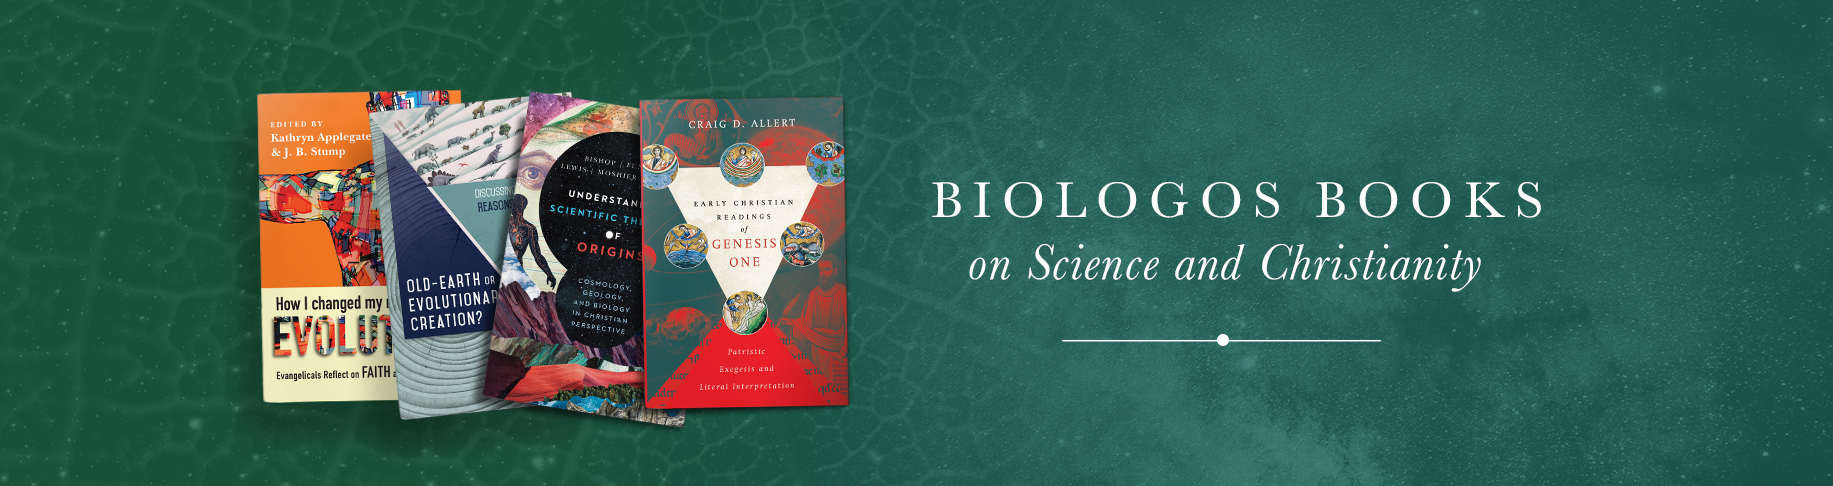 BioLogos Books on Science and Christianity